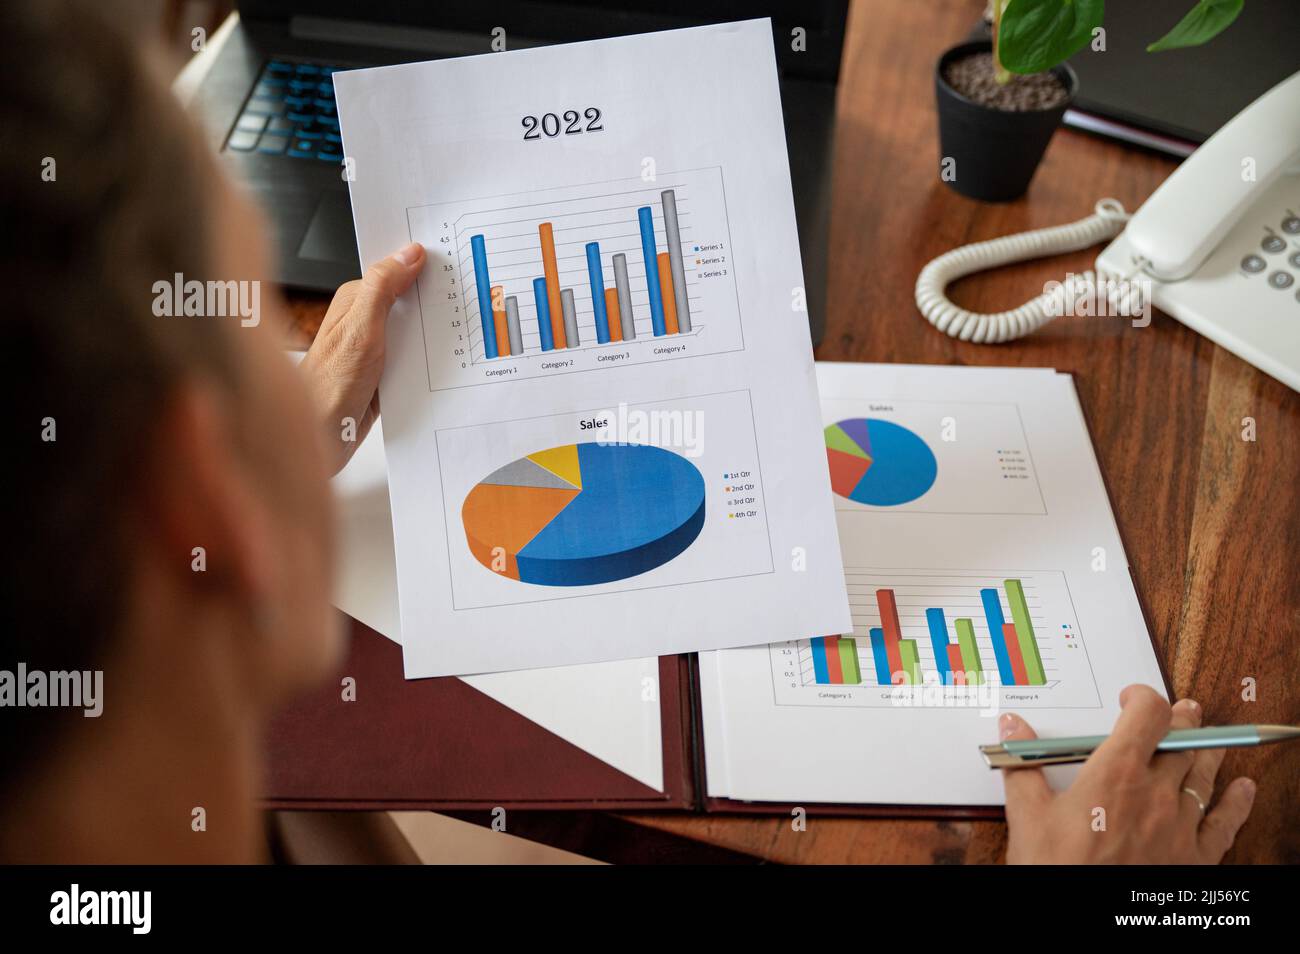 Overhead view of businesswoman reading and examining a statistical business report with colorful graphs and charts. Stock Photo